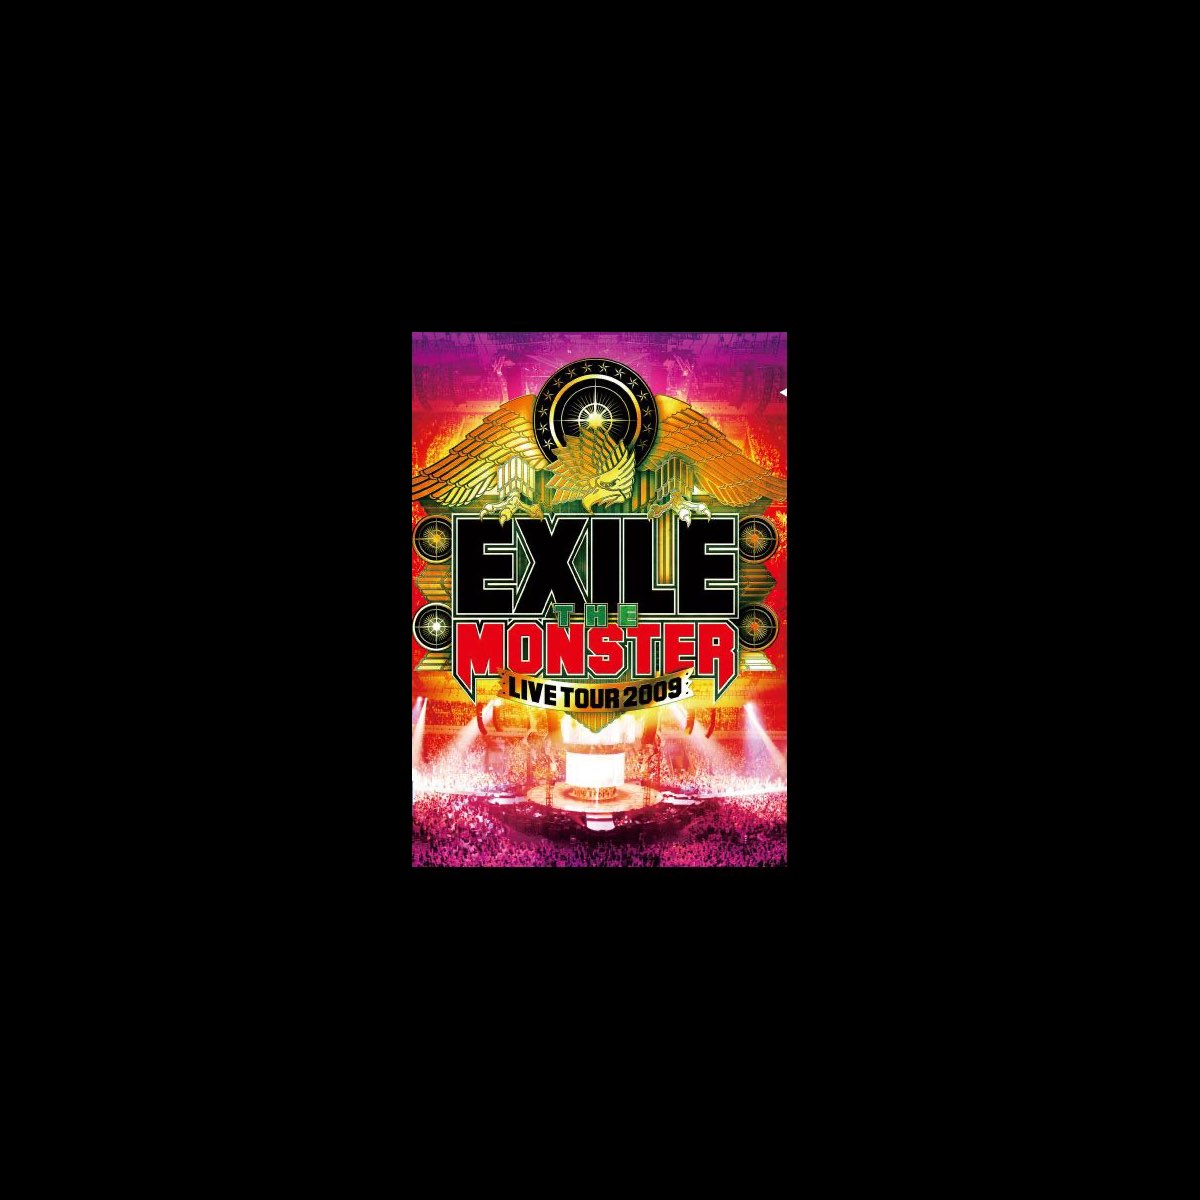 EXILEの「EXILE LIVE TOUR 2009 “THE MONSTER” (Audio Version)」をiTunesで